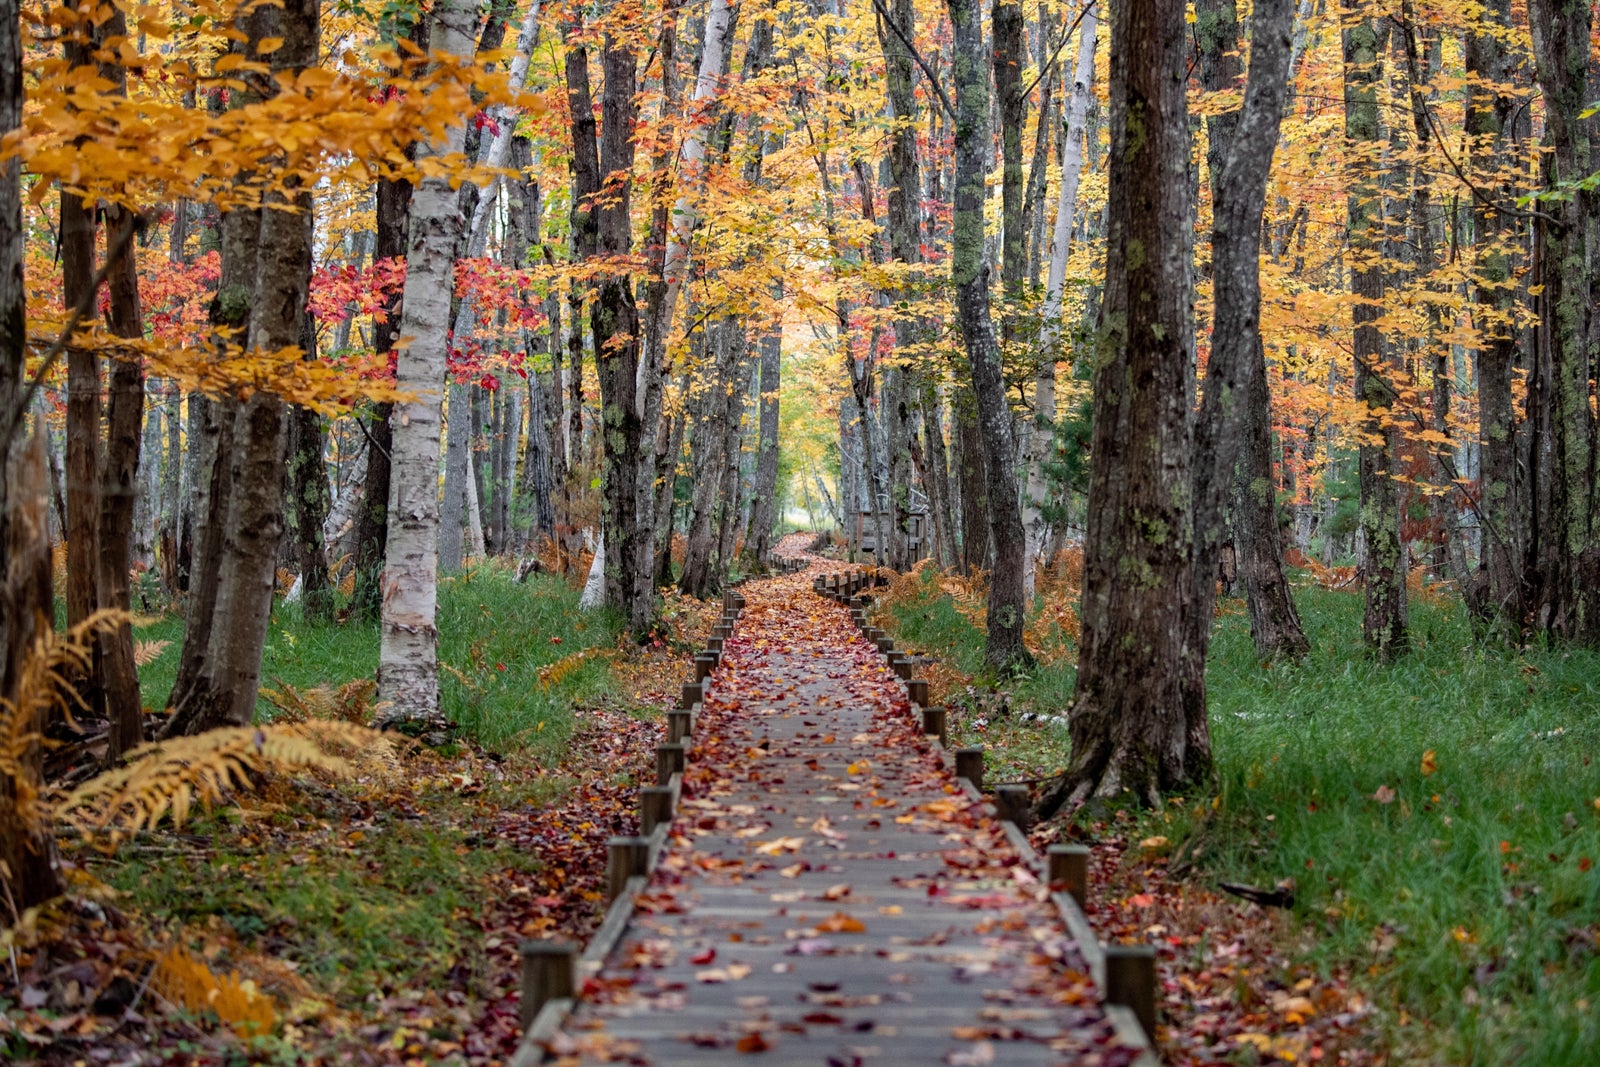 Footpath Amidst Trees In Forest During Autumn